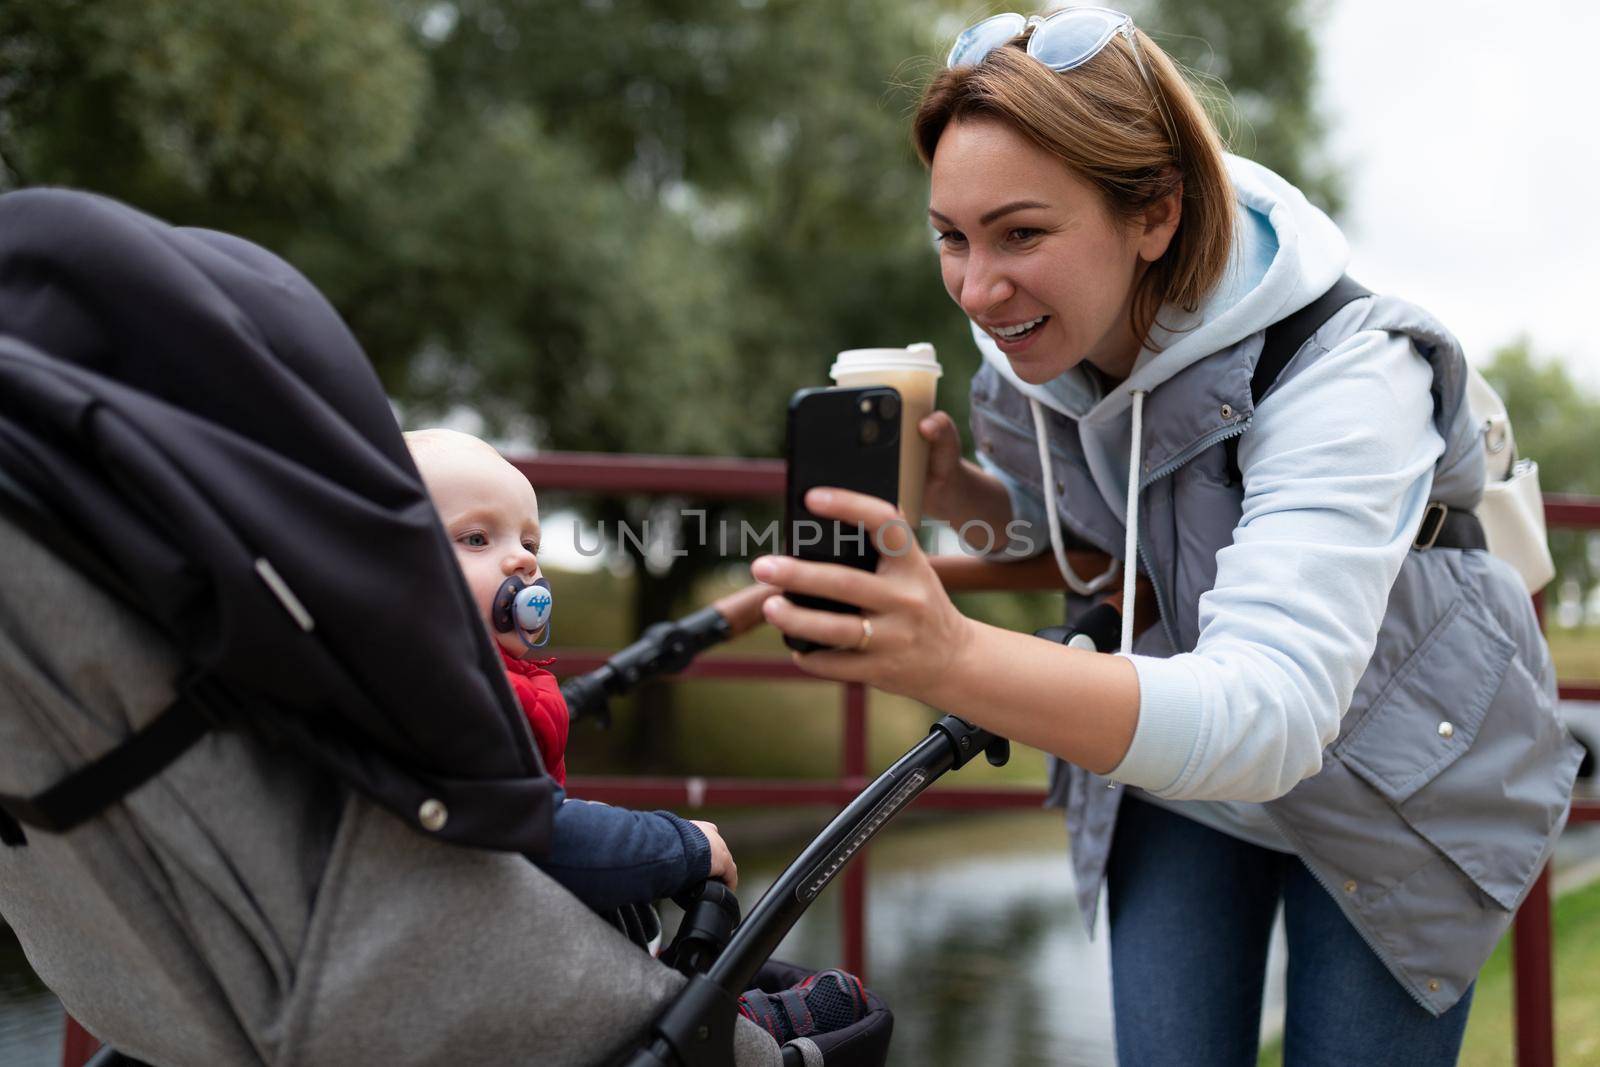 young mother shows a child in a stroller cartoon on the phone.